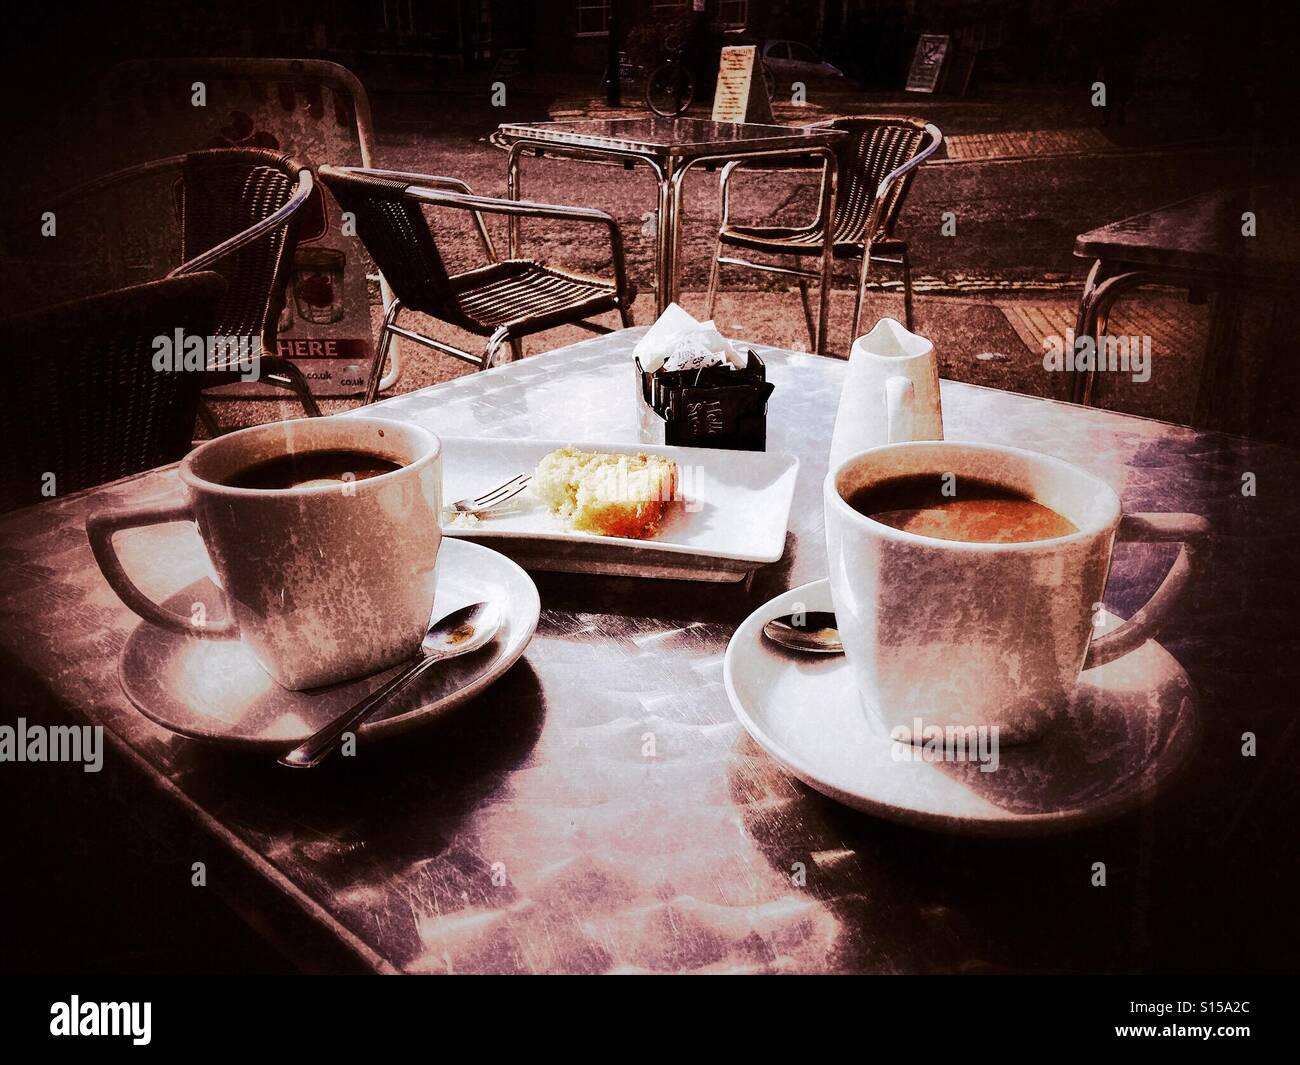 Cafe culture - two coffees in white cups and saucers on an outdoor table. Stock Photo